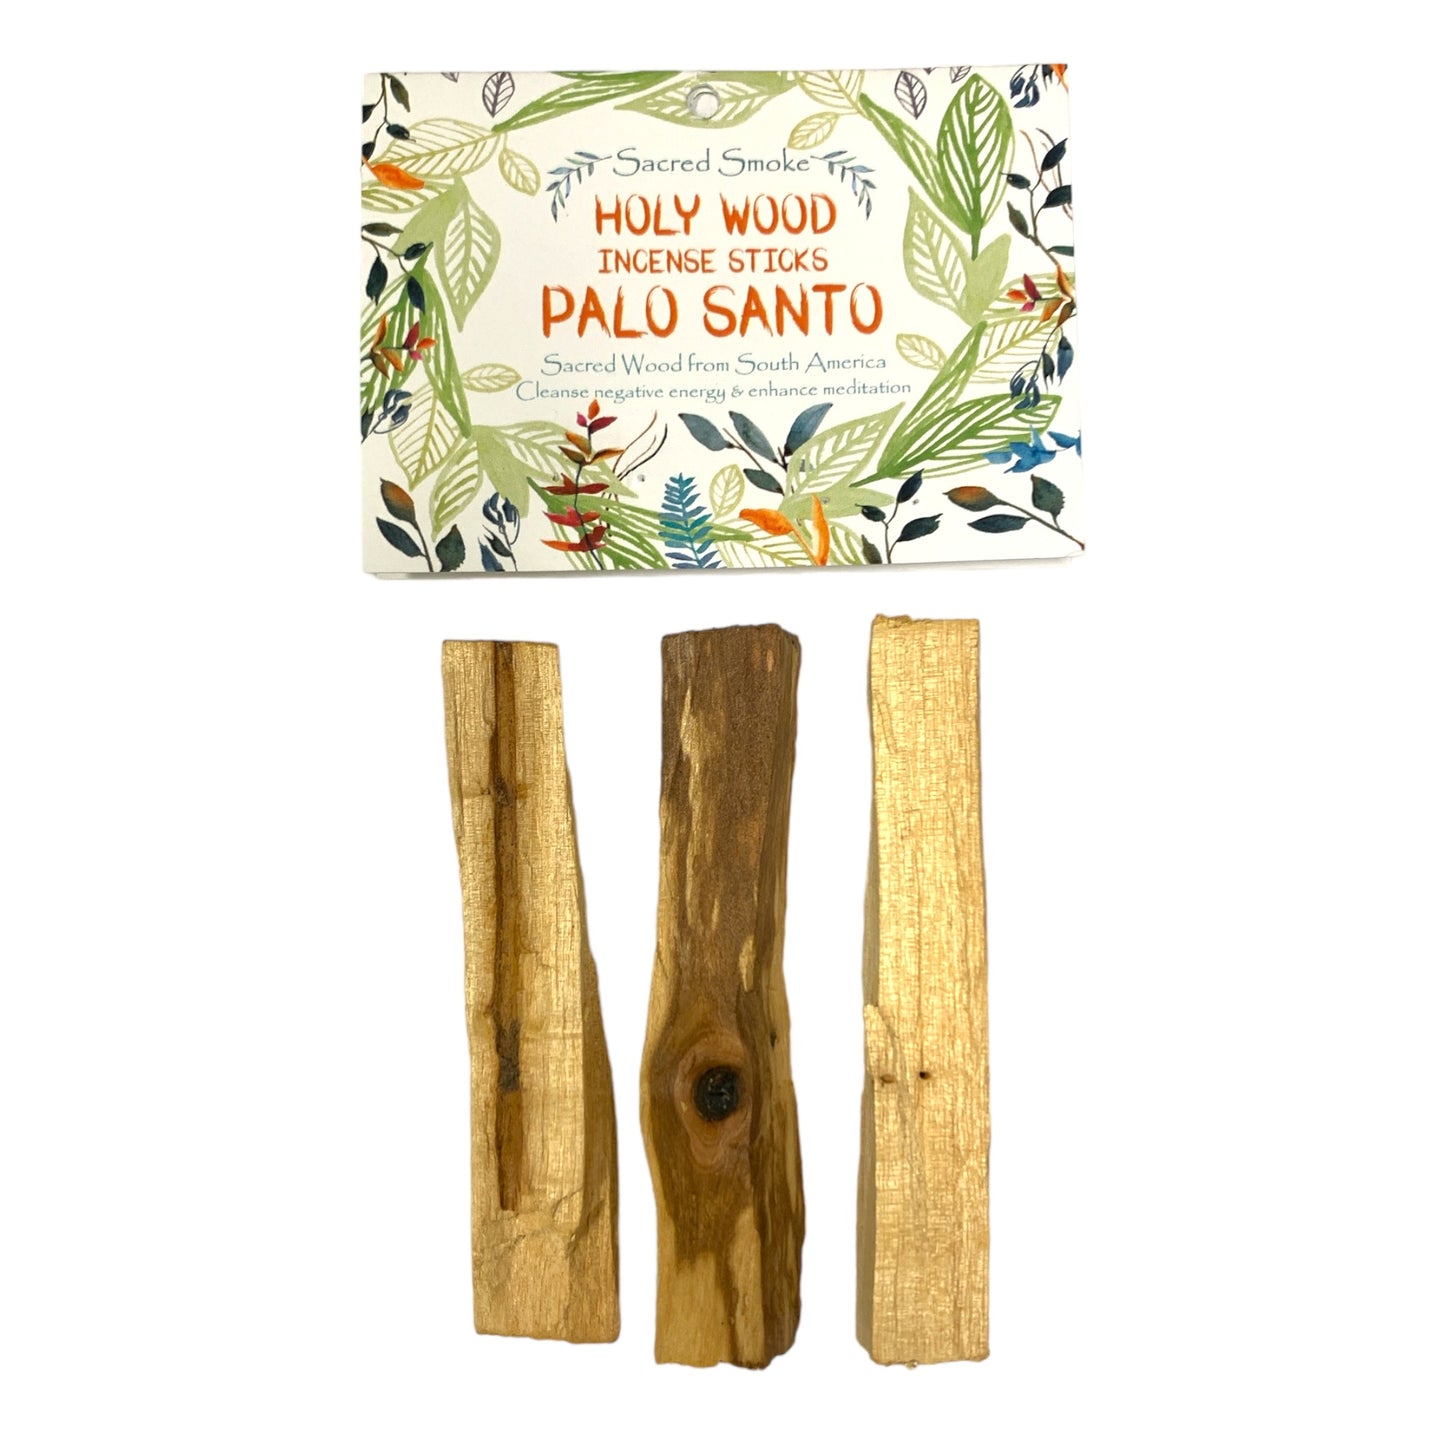 PALO SANTO HOLY WOOD STICKS - 30 Gram Average per Pack - Sacred Smoke Smudge Supplies - Packaged in Canada